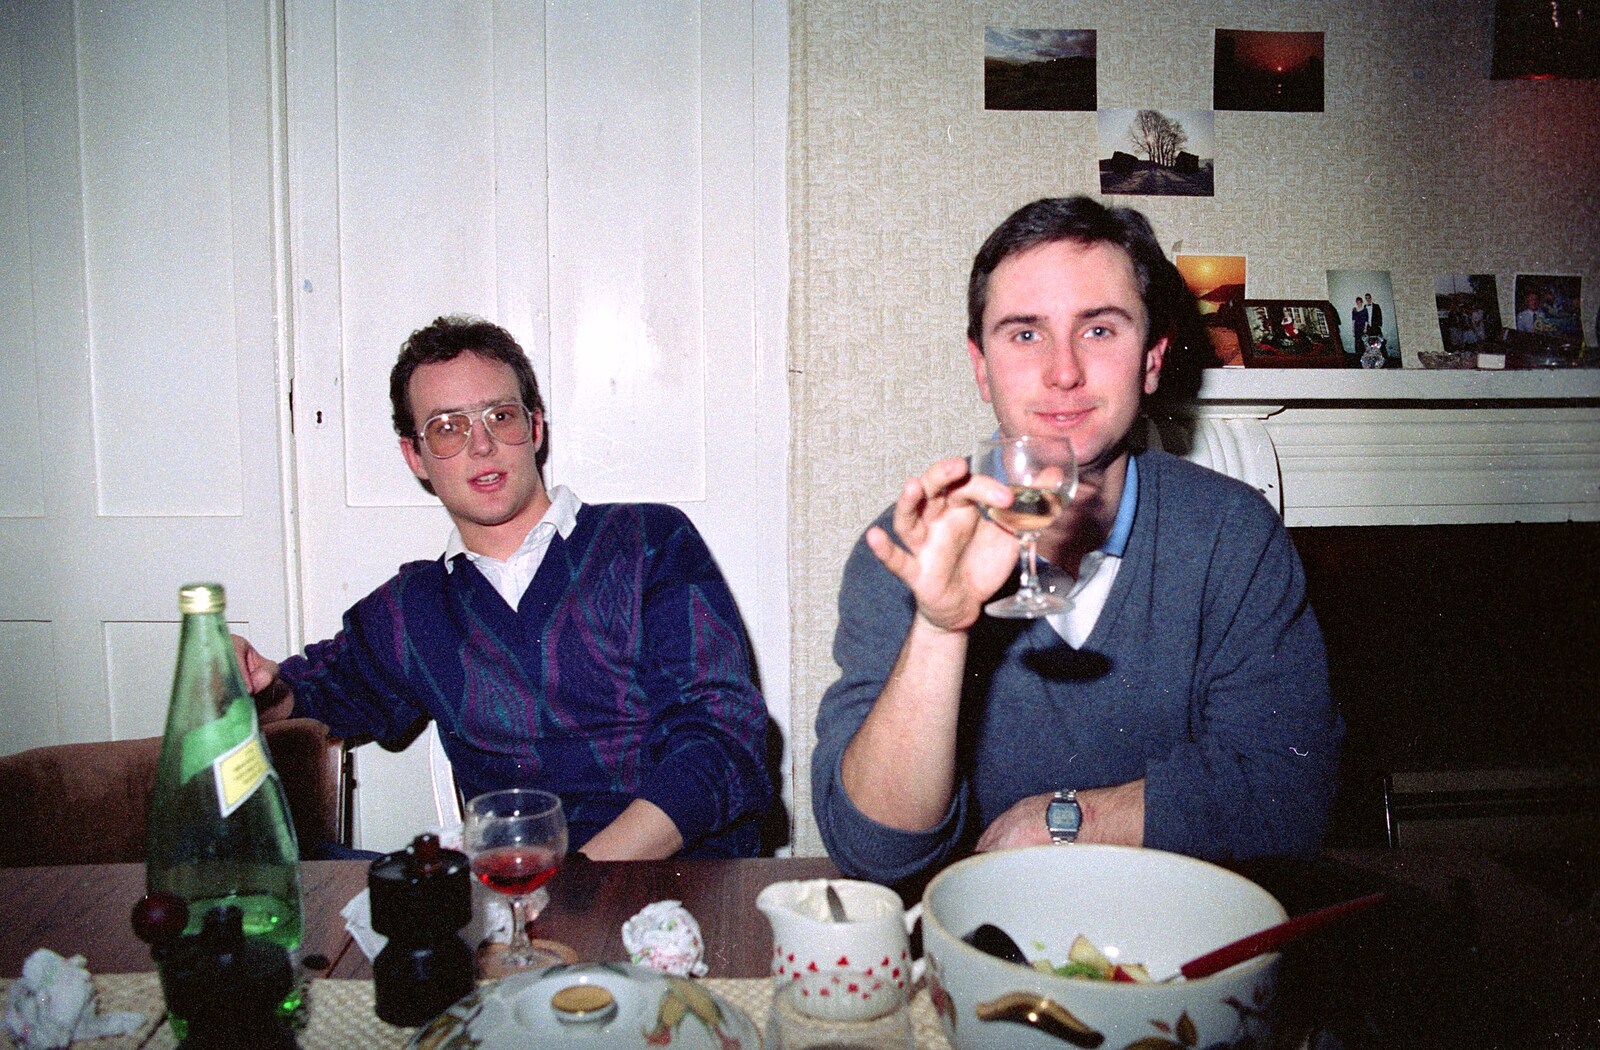 Riki holds up a glass of wine from Uni: A Dinner Party, Harbertonford and Buckfastleigh, Devon - 24th December 1988